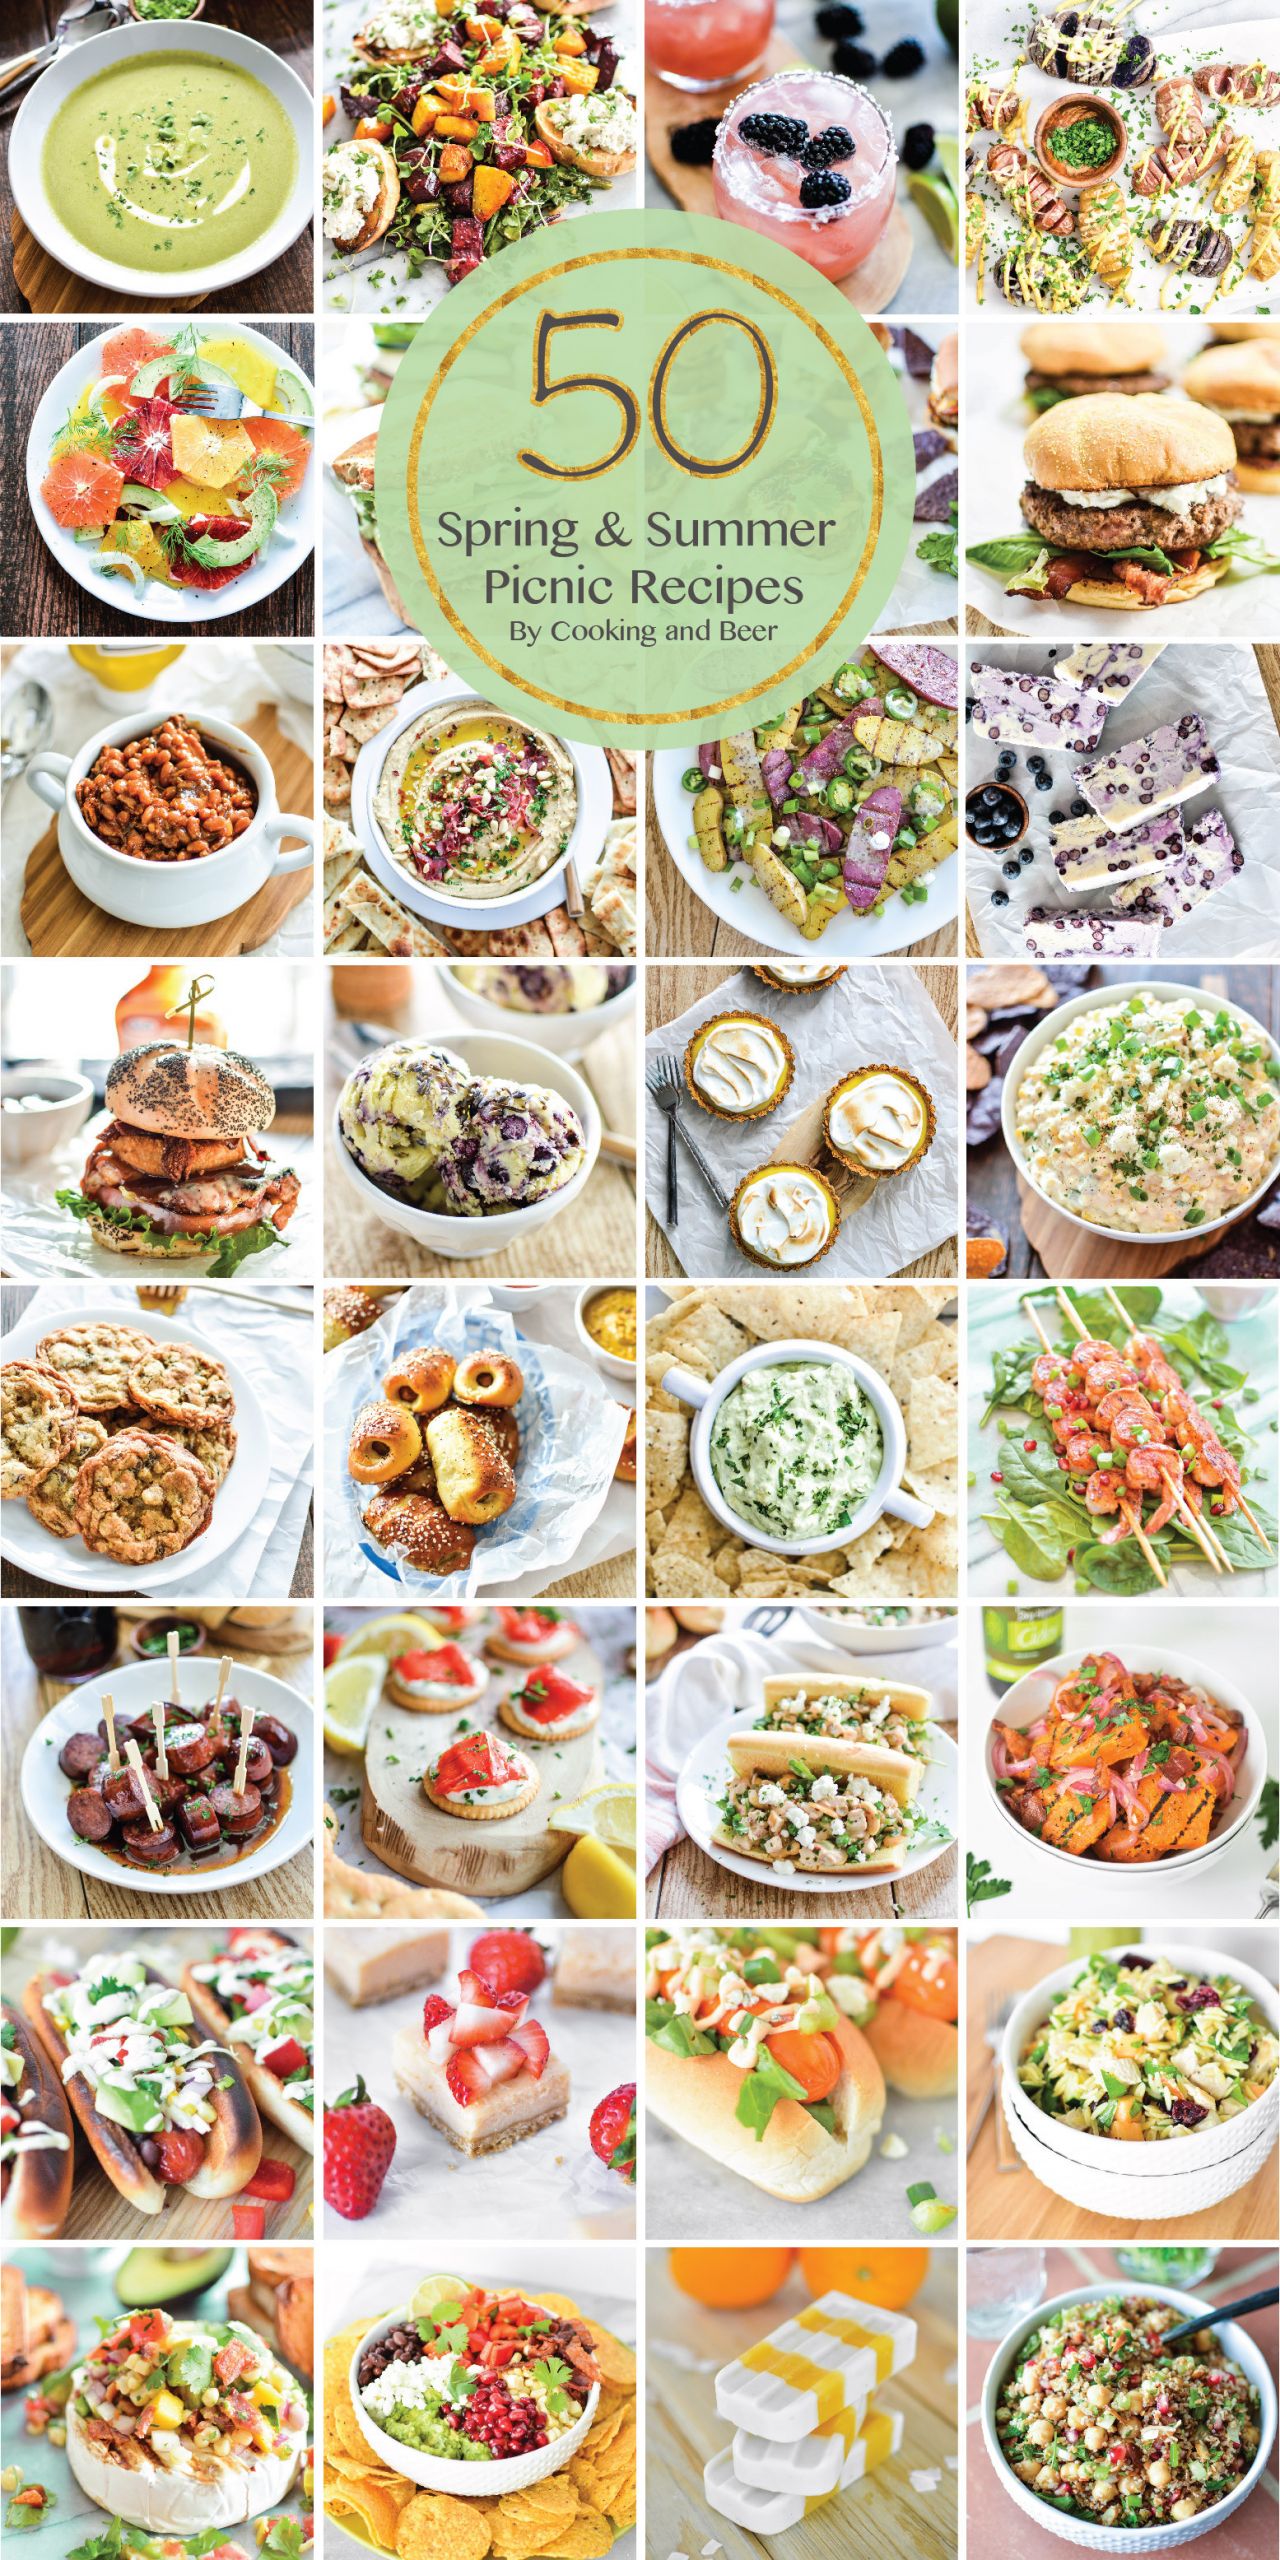 Picnic Dinner Ideas
 50 Summer Picnic RecipesCooking and Beer